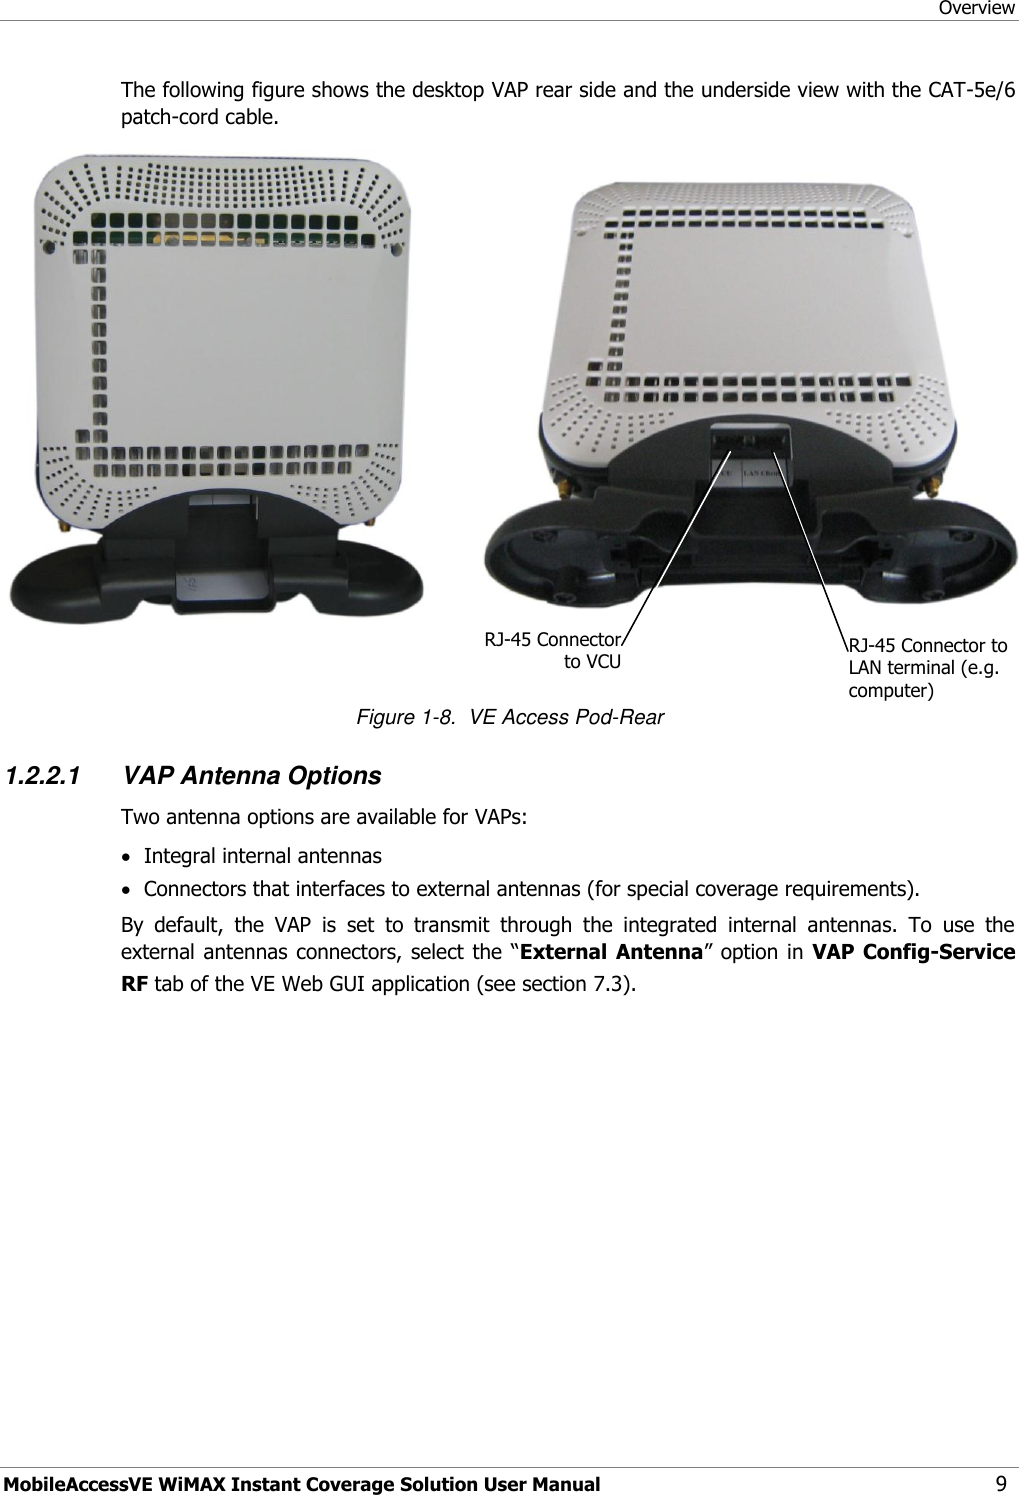 Overview MobileAccessVE WiMAX Instant Coverage Solution User Manual 9 The following figure shows the desktop VAP rear side and the underside view with the CAT-5e/6 patch-cord cable.   Figure 1-8.  VE Access Pod-Rear 1.2.2.1 VAP Antenna Options Two antenna options are available for VAPs:  Integral internal antennas  Connectors that interfaces to external antennas (for special coverage requirements). By  default,  the  VAP  is  set  to  transmit  through  the  integrated  internal  antennas.  To  use  the external antennas connectors, select the “External  Antenna” option in  VAP  Config-Service RF tab of the VE Web GUI application (see section 7.3). RJ-45 Connector to VCU  RJ-45 Connector to LAN terminal (e.g. computer)  